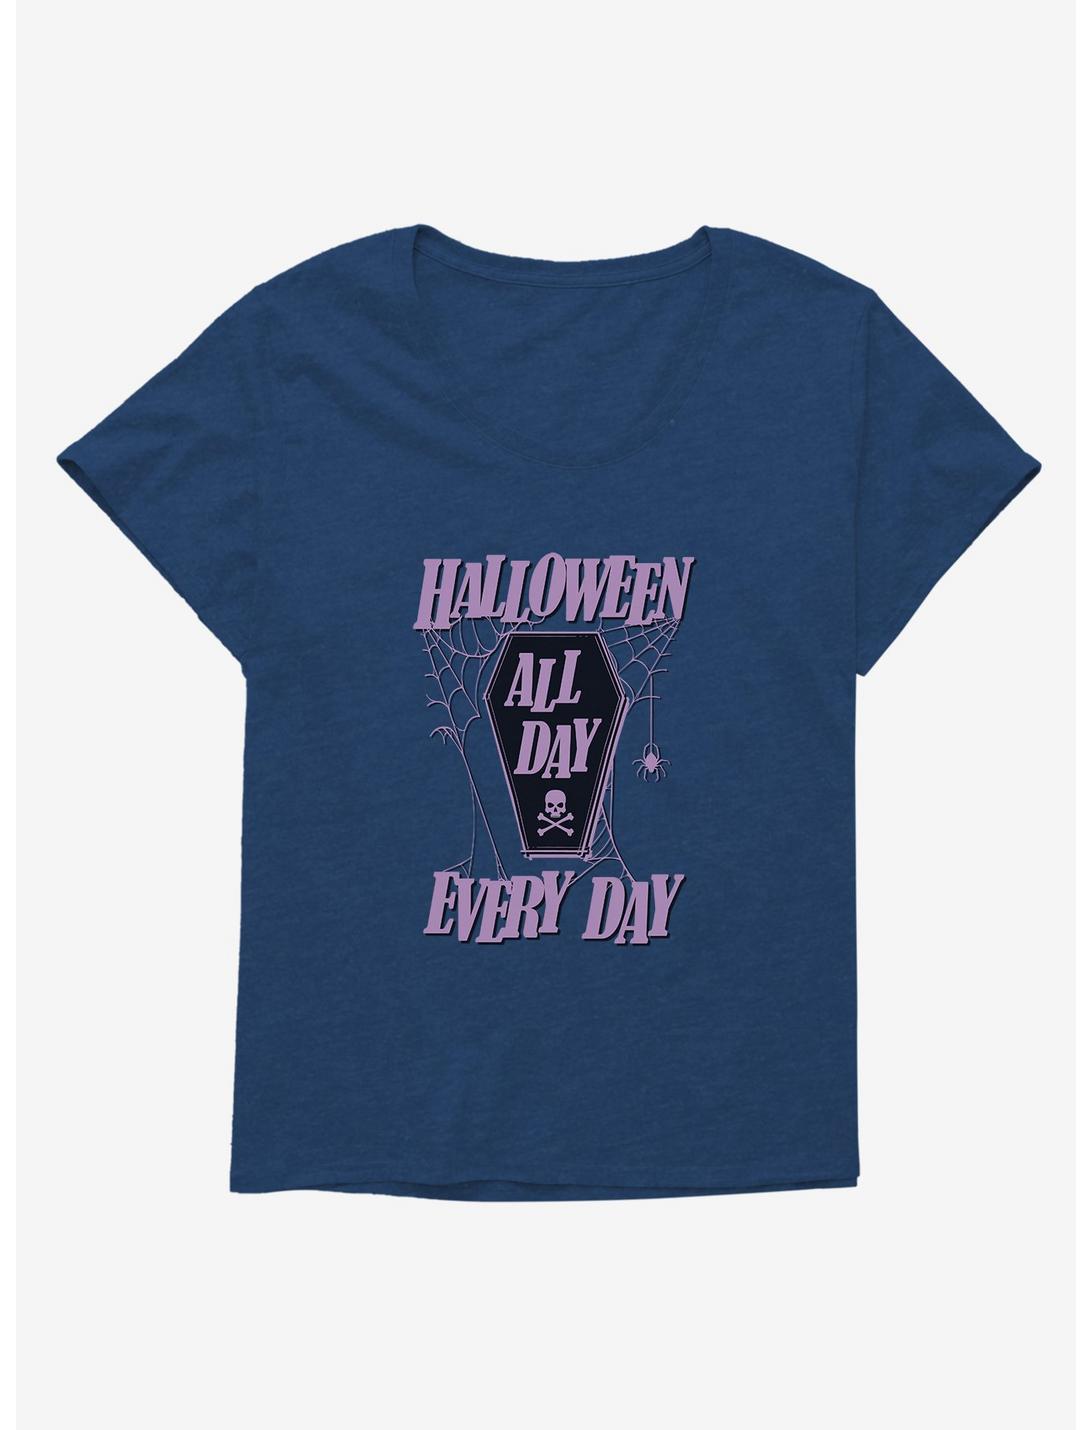 All Day Every Day Womens T-Shirt Plus Size, , hi-res